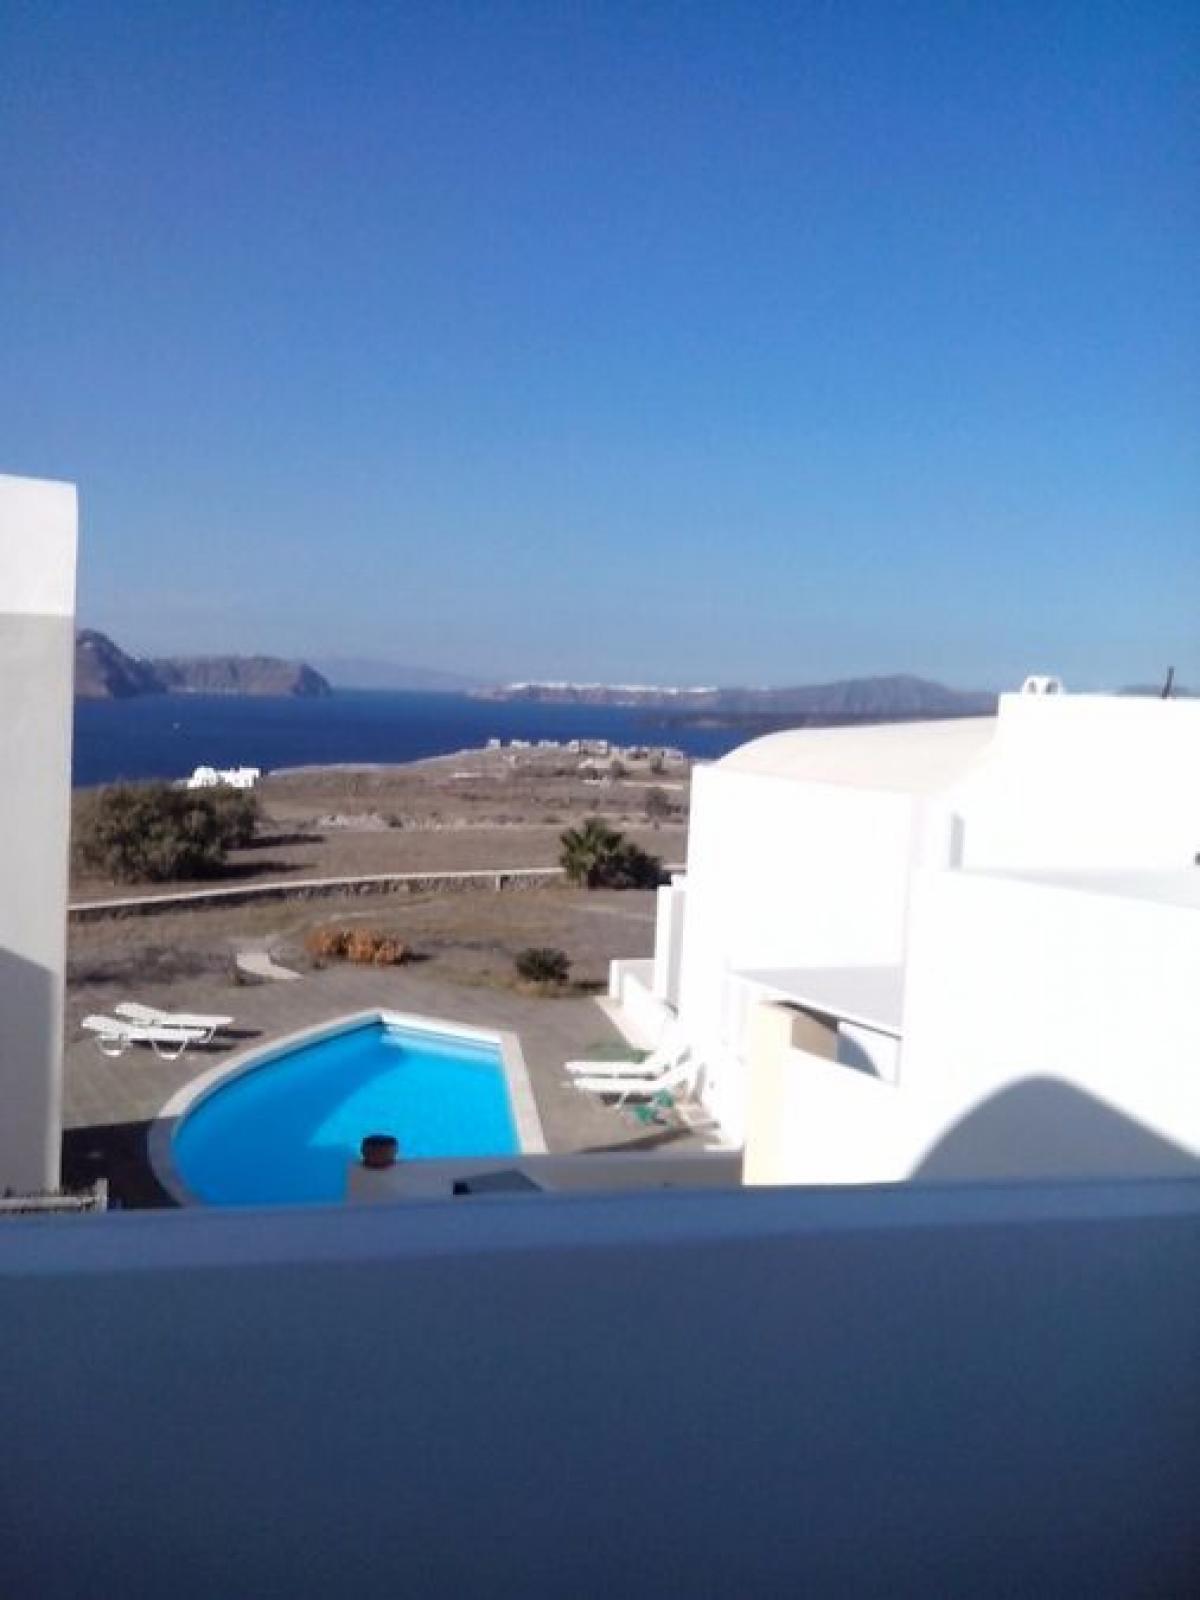 Picture of Vacation Cottages For Sale in Santorini, Cyclades Islands, Greece